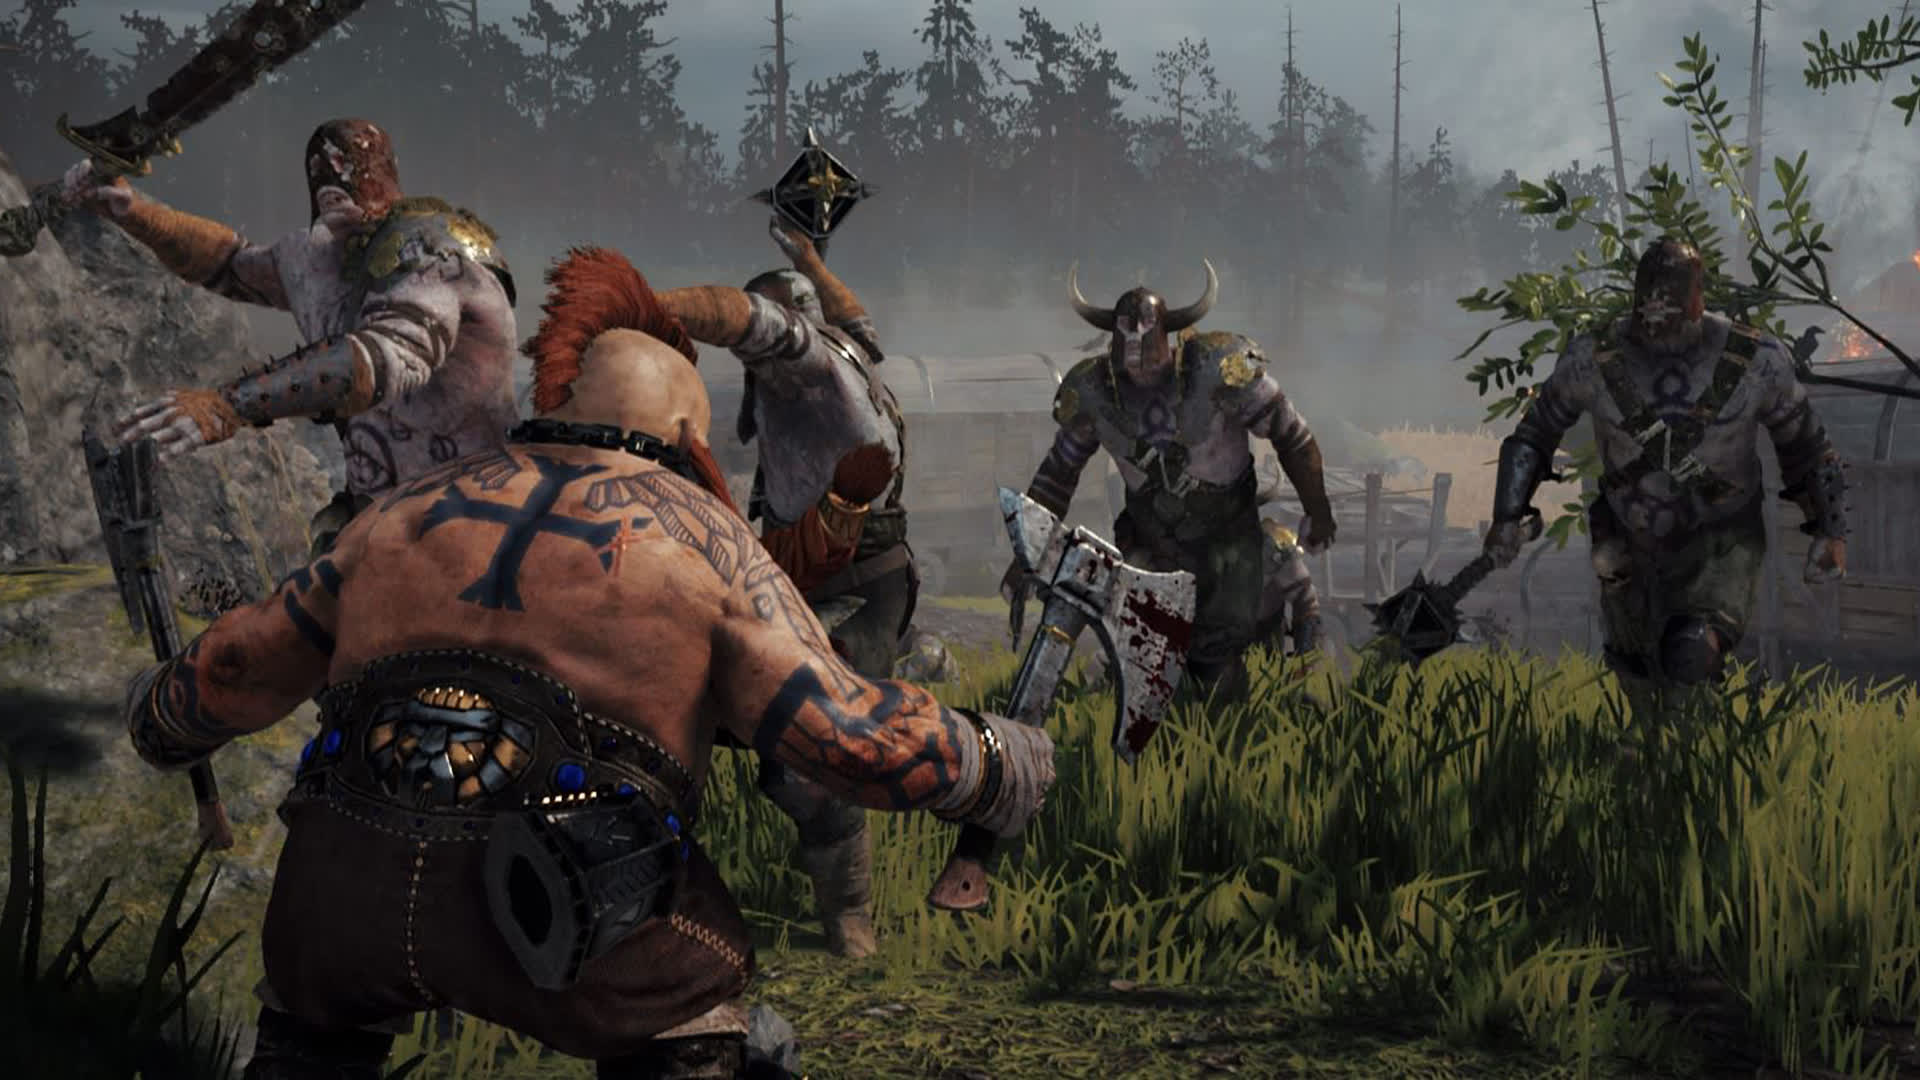 Warhammer: Vermintide 2 and Rising Storm 2: Vietnam are now free to download and keep